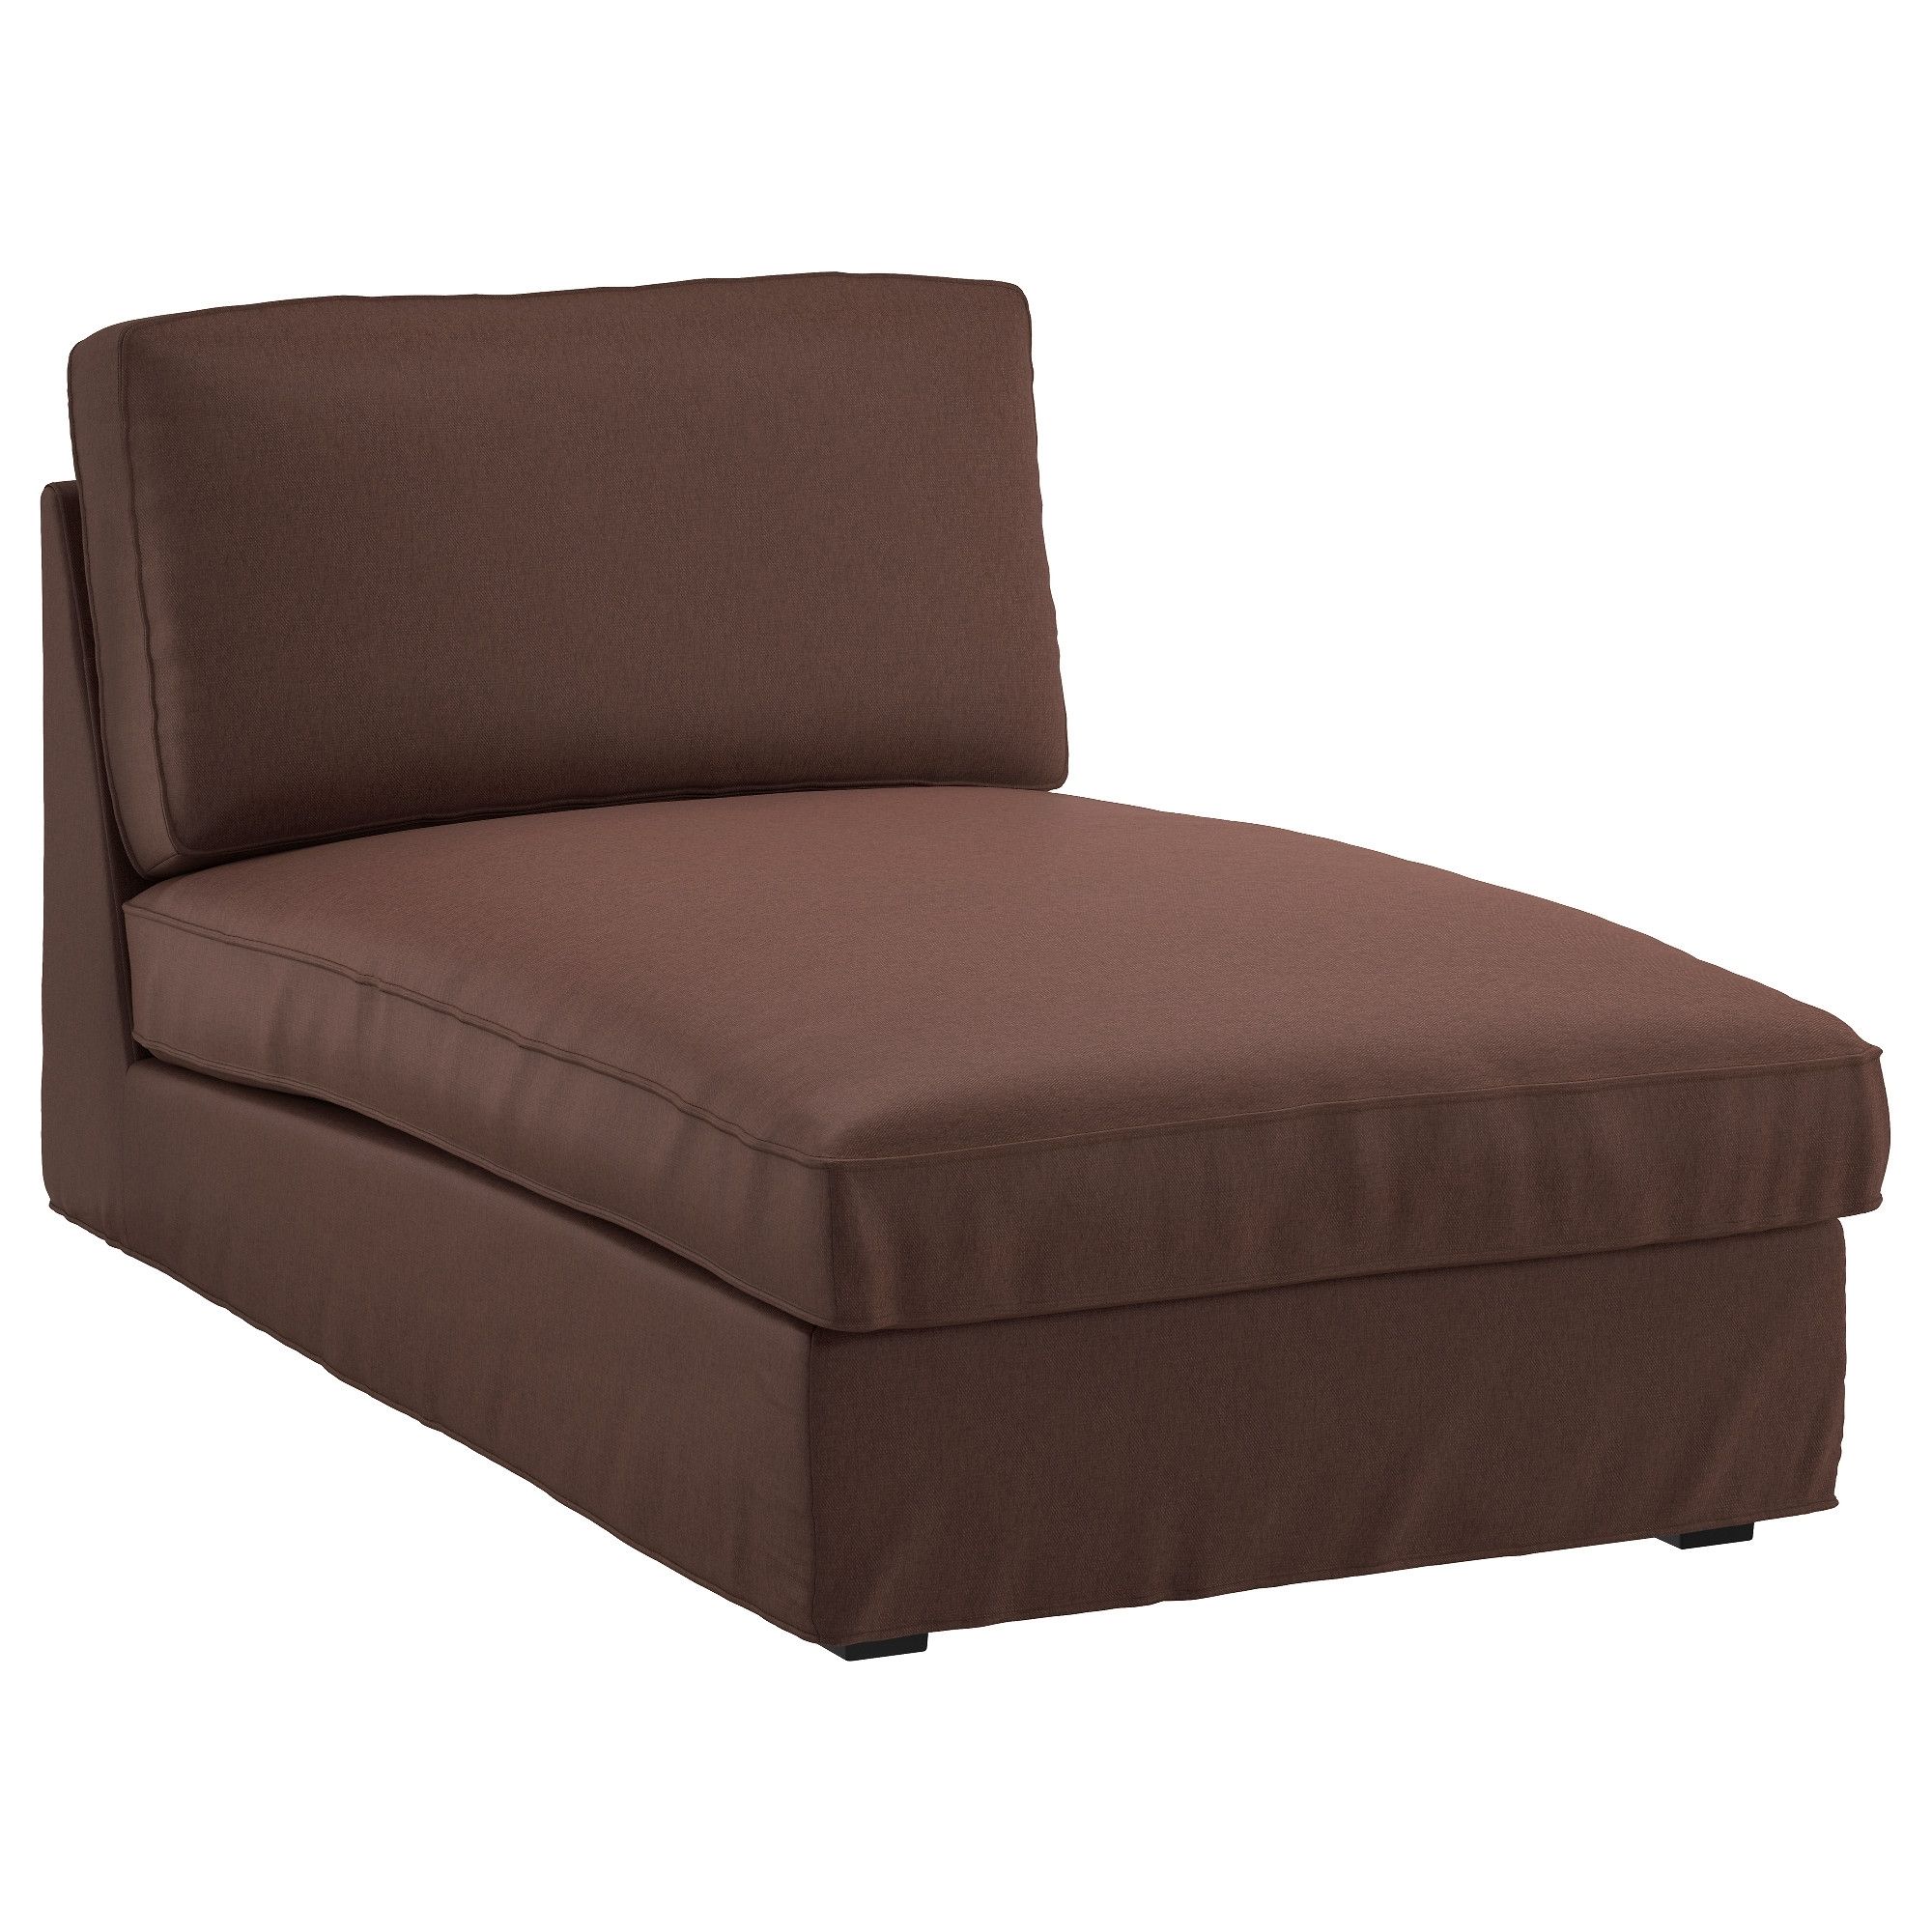 Widely Used High Quality Chaise Lounge Chairs Throughout Chaise Lounge Chair Ikea – Visionexchange (View 12 of 15)